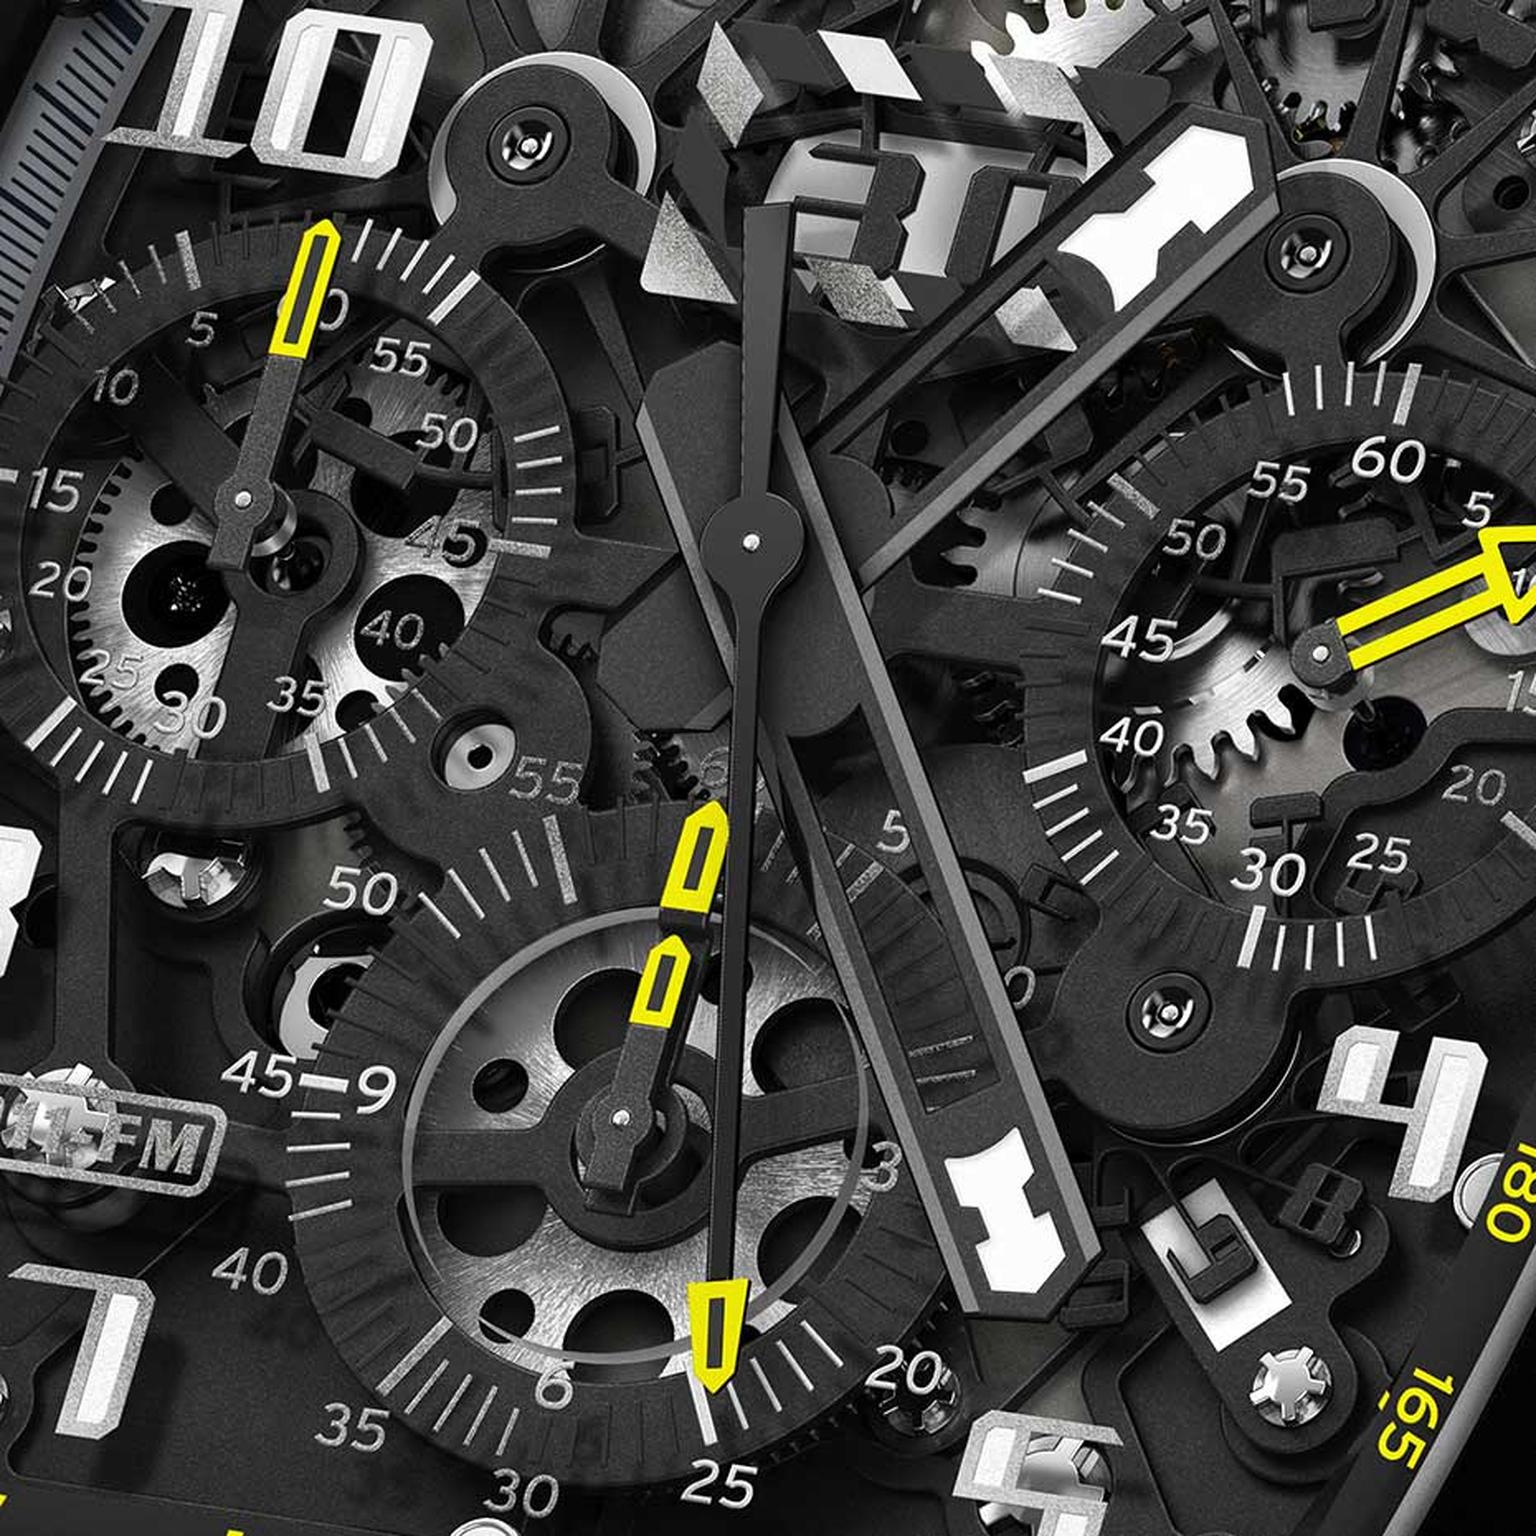 In keeping with the sleek, high-tech appeal of the new Richard Mille watches RM 011 Yellow Flash Automatic Flyback Chronograph, the skeletonised automatic movement has been blackened and features a rotor with variable geometry. A high-tech concoction of T